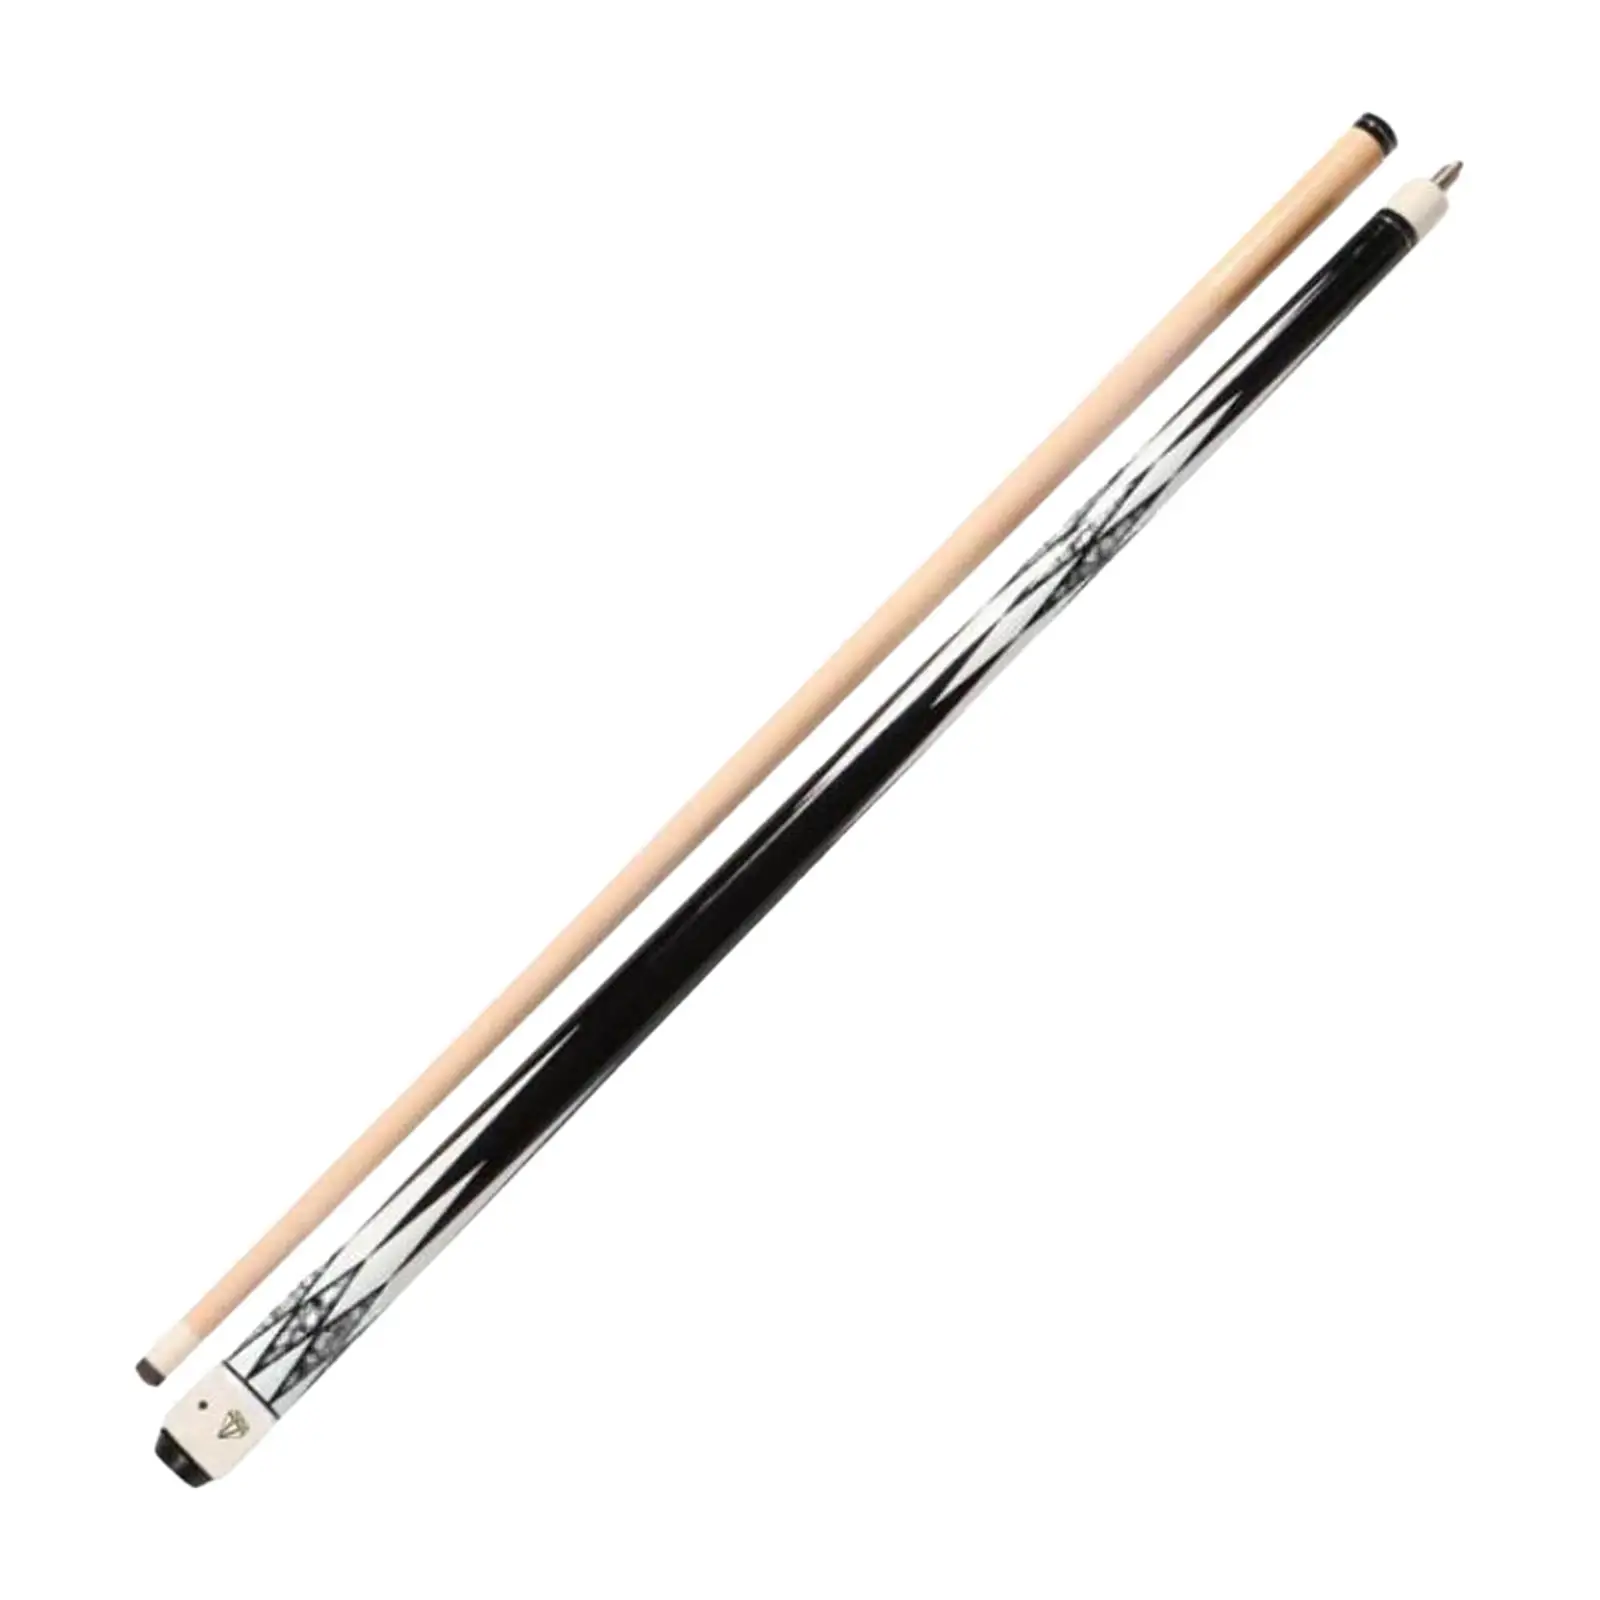 Pool Cue Professional Wooden White Ferrule with Carrying Bag 145cm Snooker Cue for Adult Man Cave Gift Unisex Billiard Players